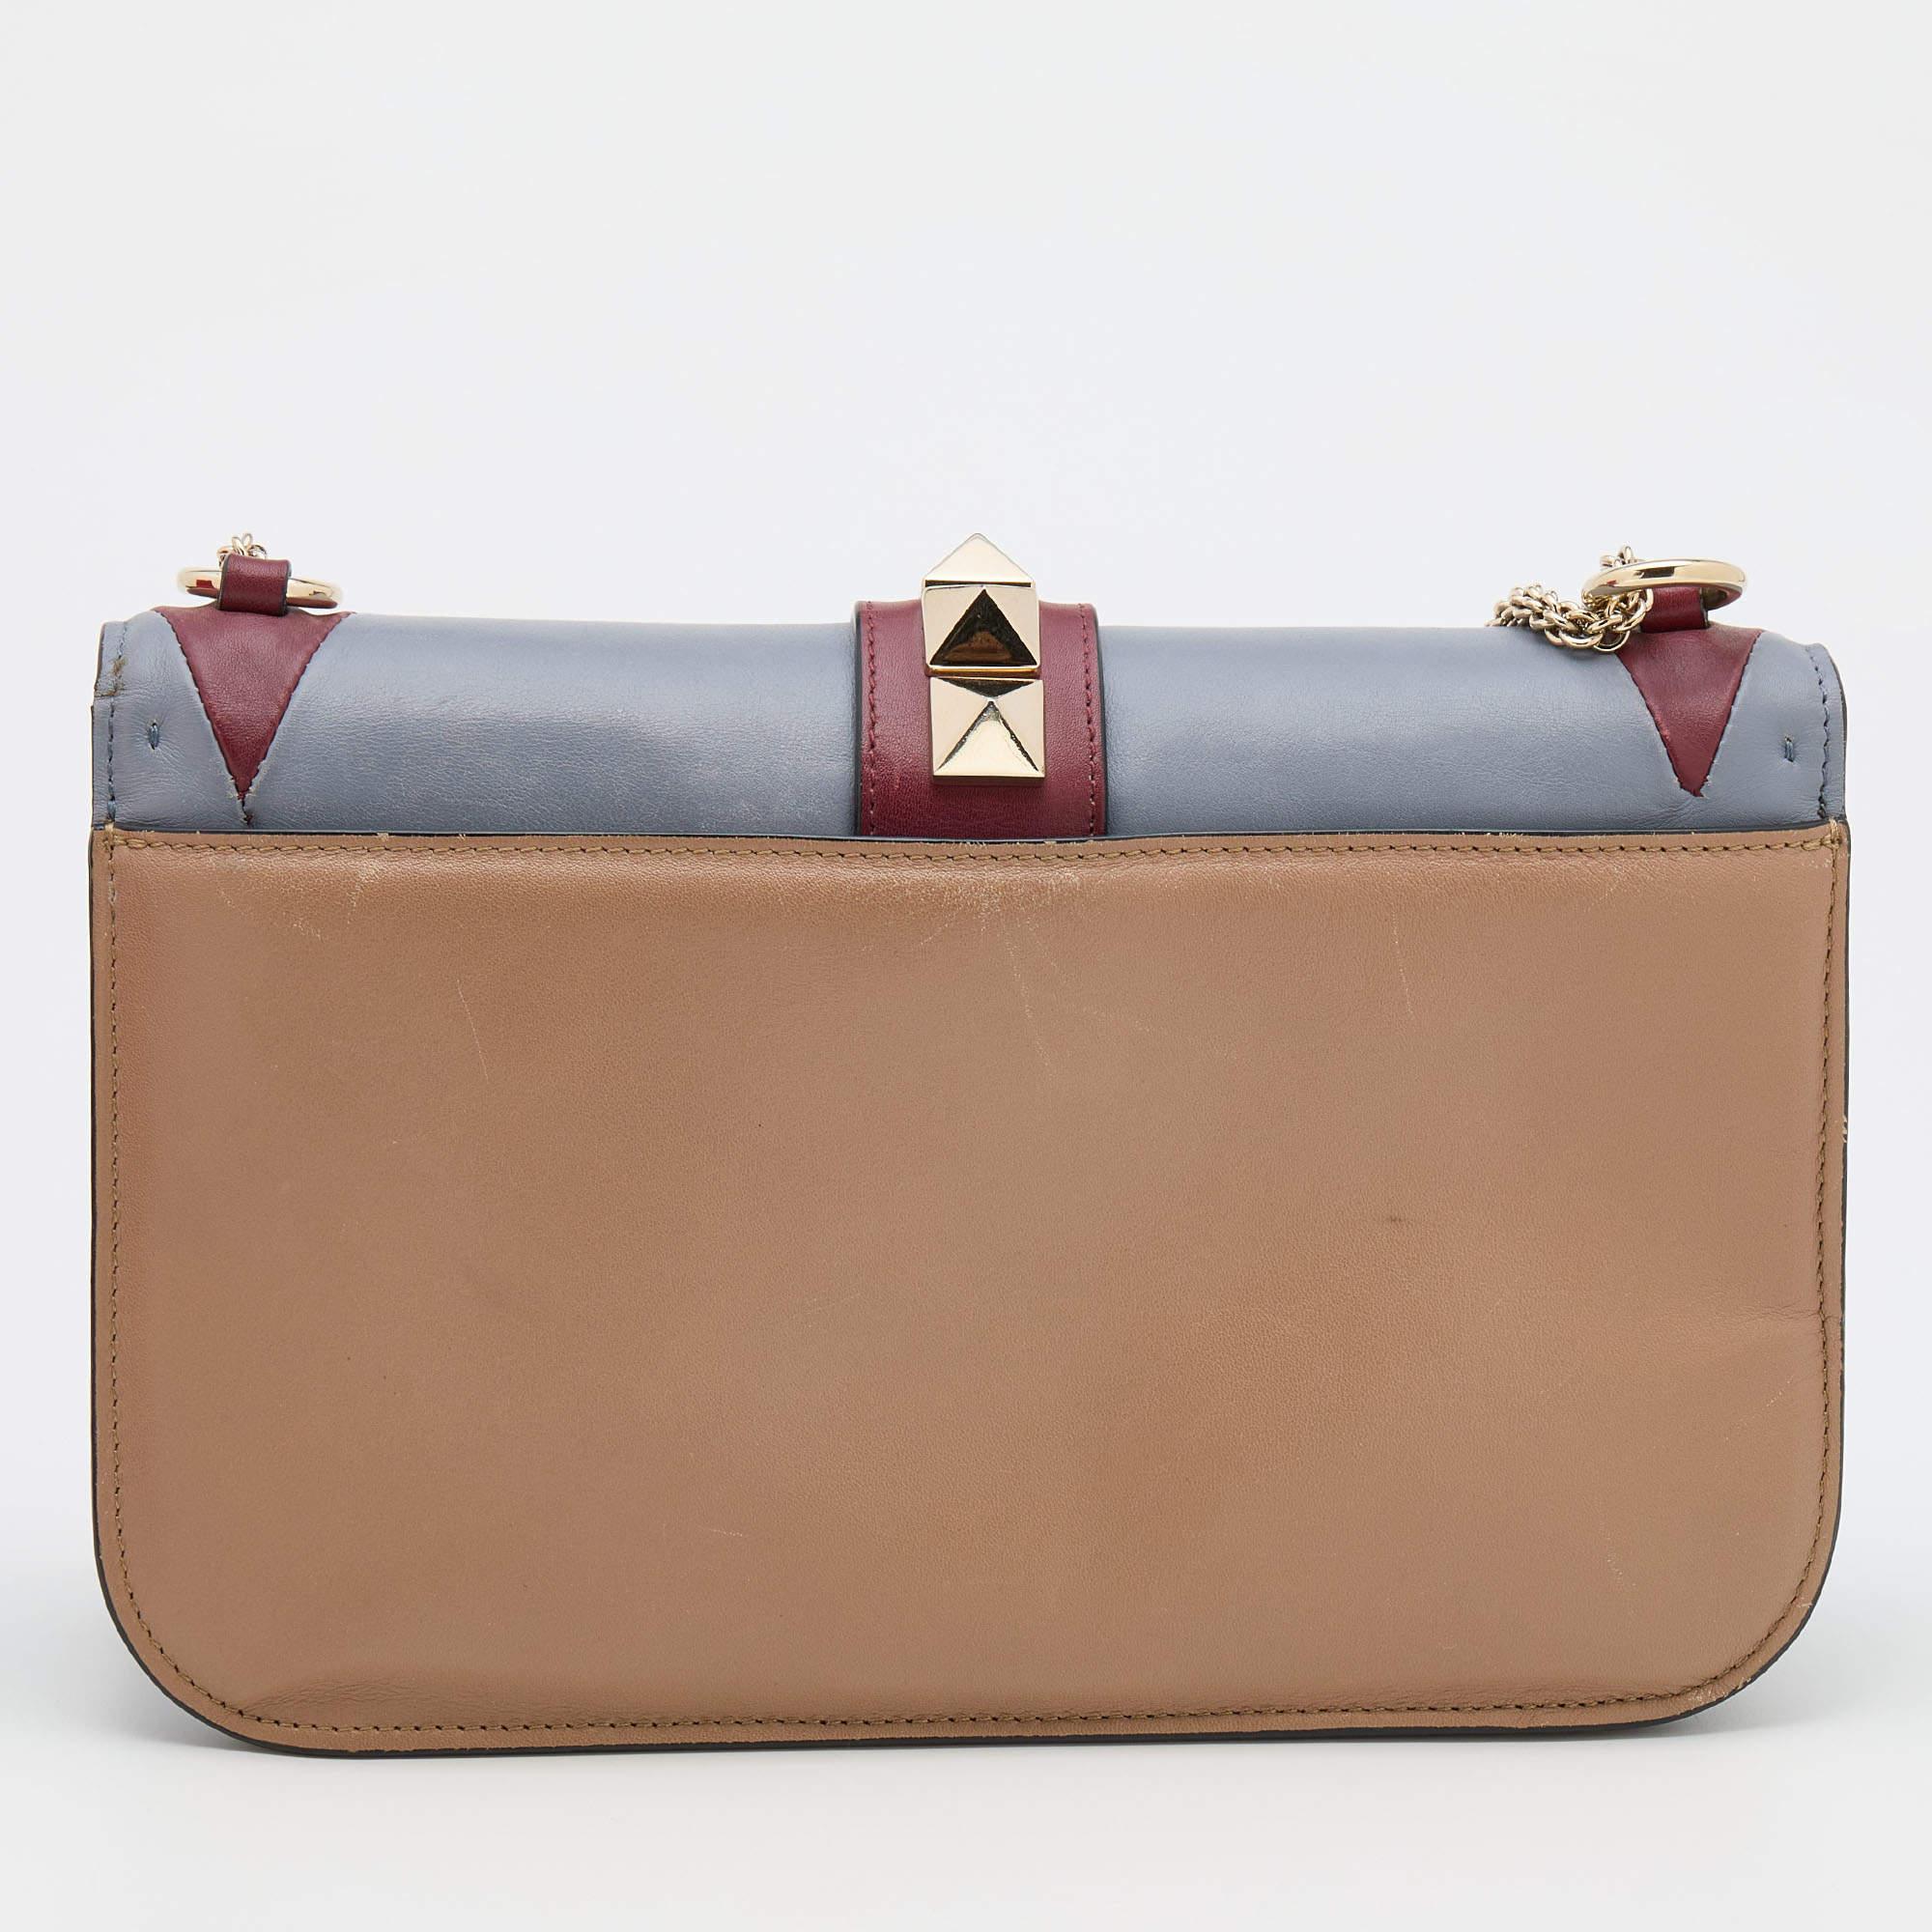 Flap bags like this one will never go out of style. It features a well-designed exterior and the front flap opens to an interior with enough space to keep your daily essentials. This elegant bag is a must-have in your collection.

Includes: Original